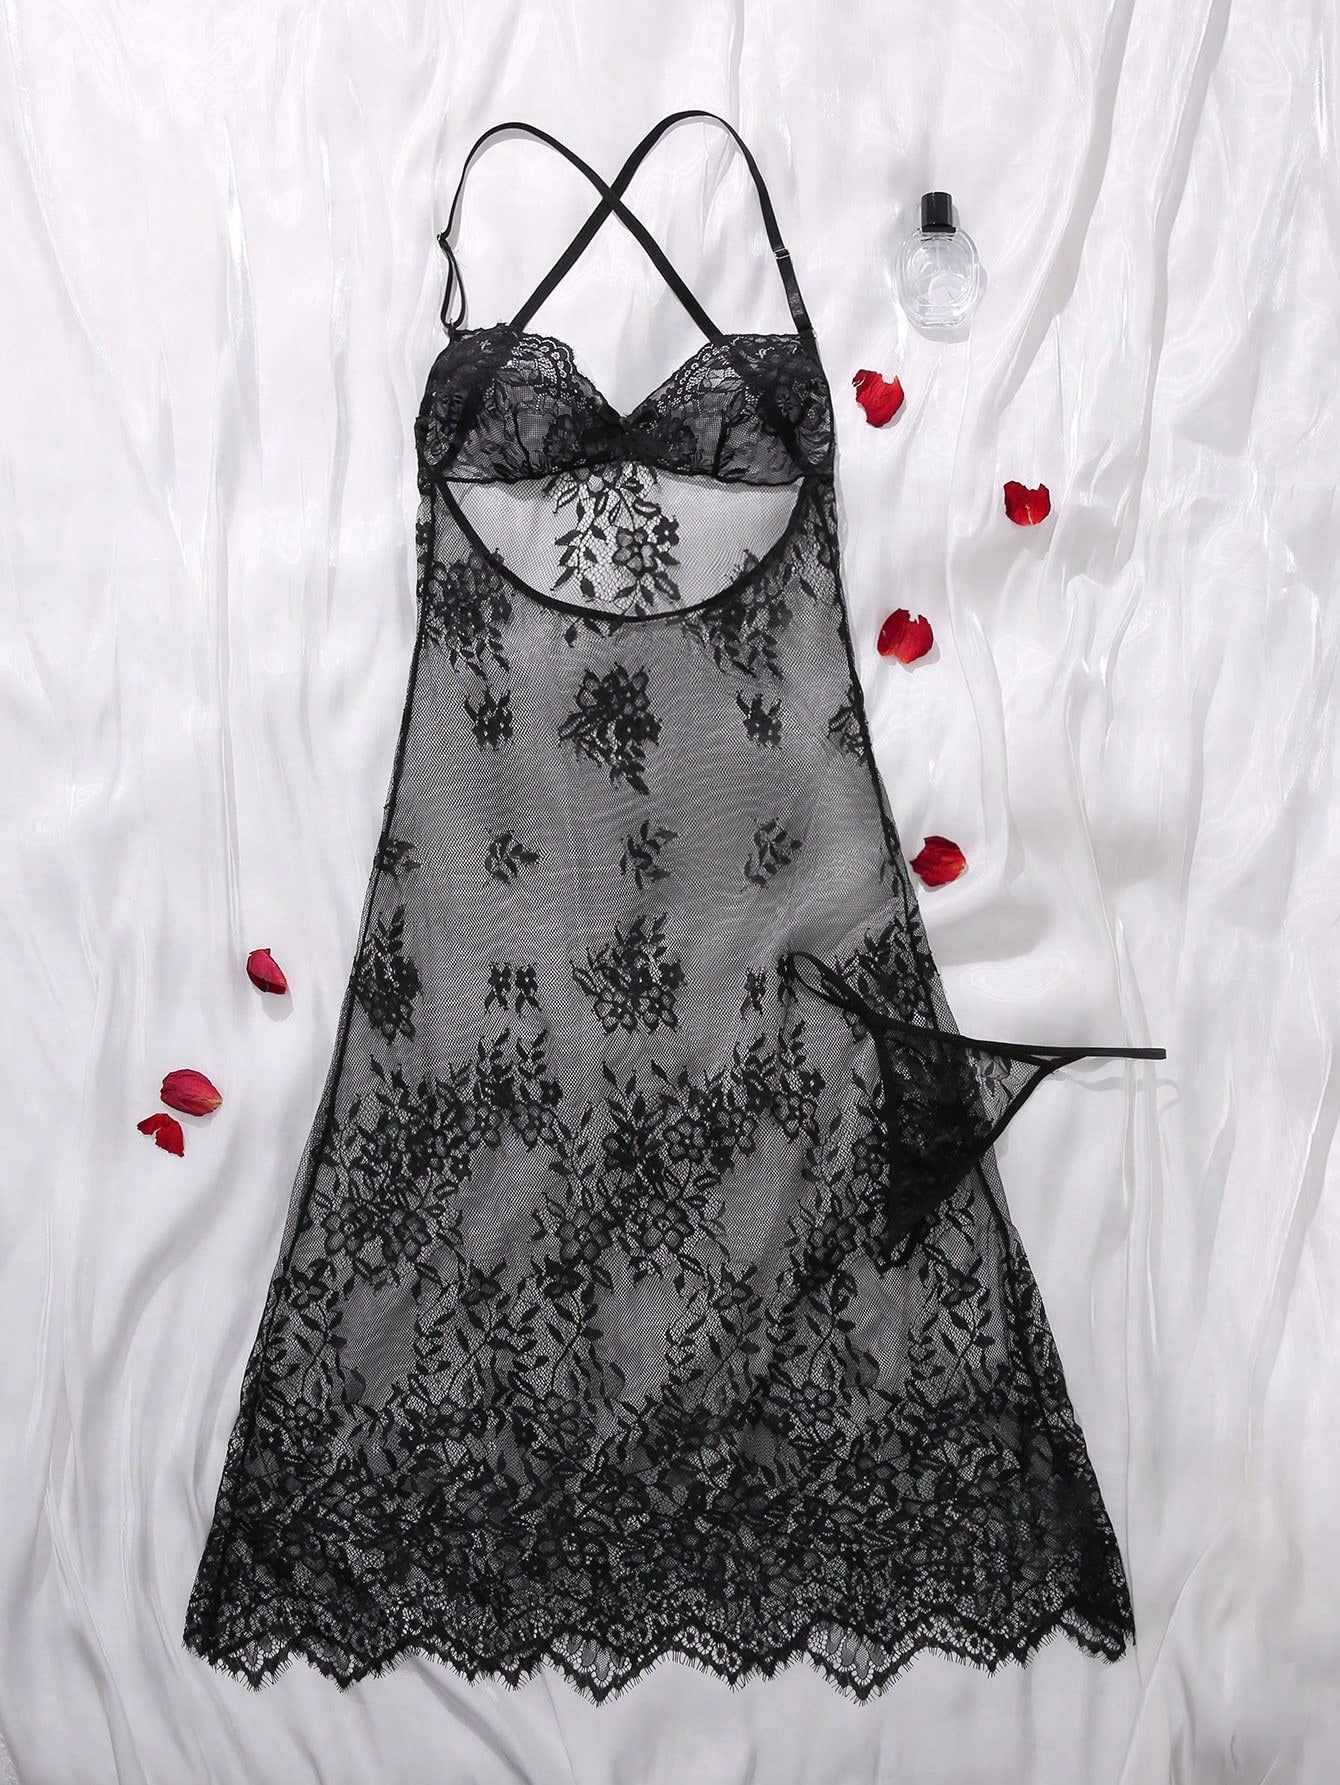 Floral Embroidery Sheer Mesh Sexy Lingerie Cami Dress & Thong Set